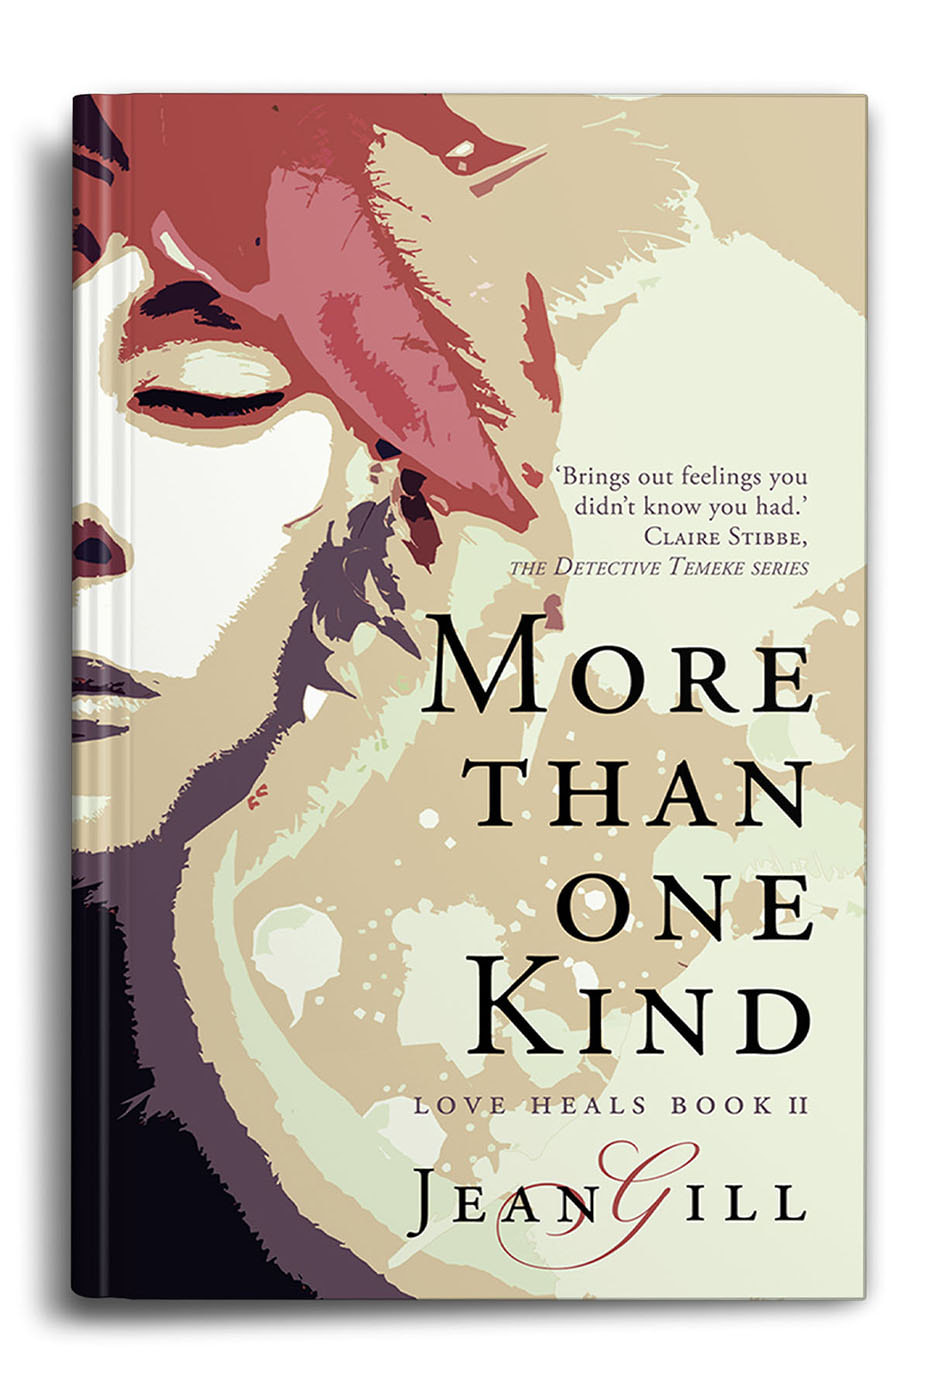 More Than One Kind - Jean Gill